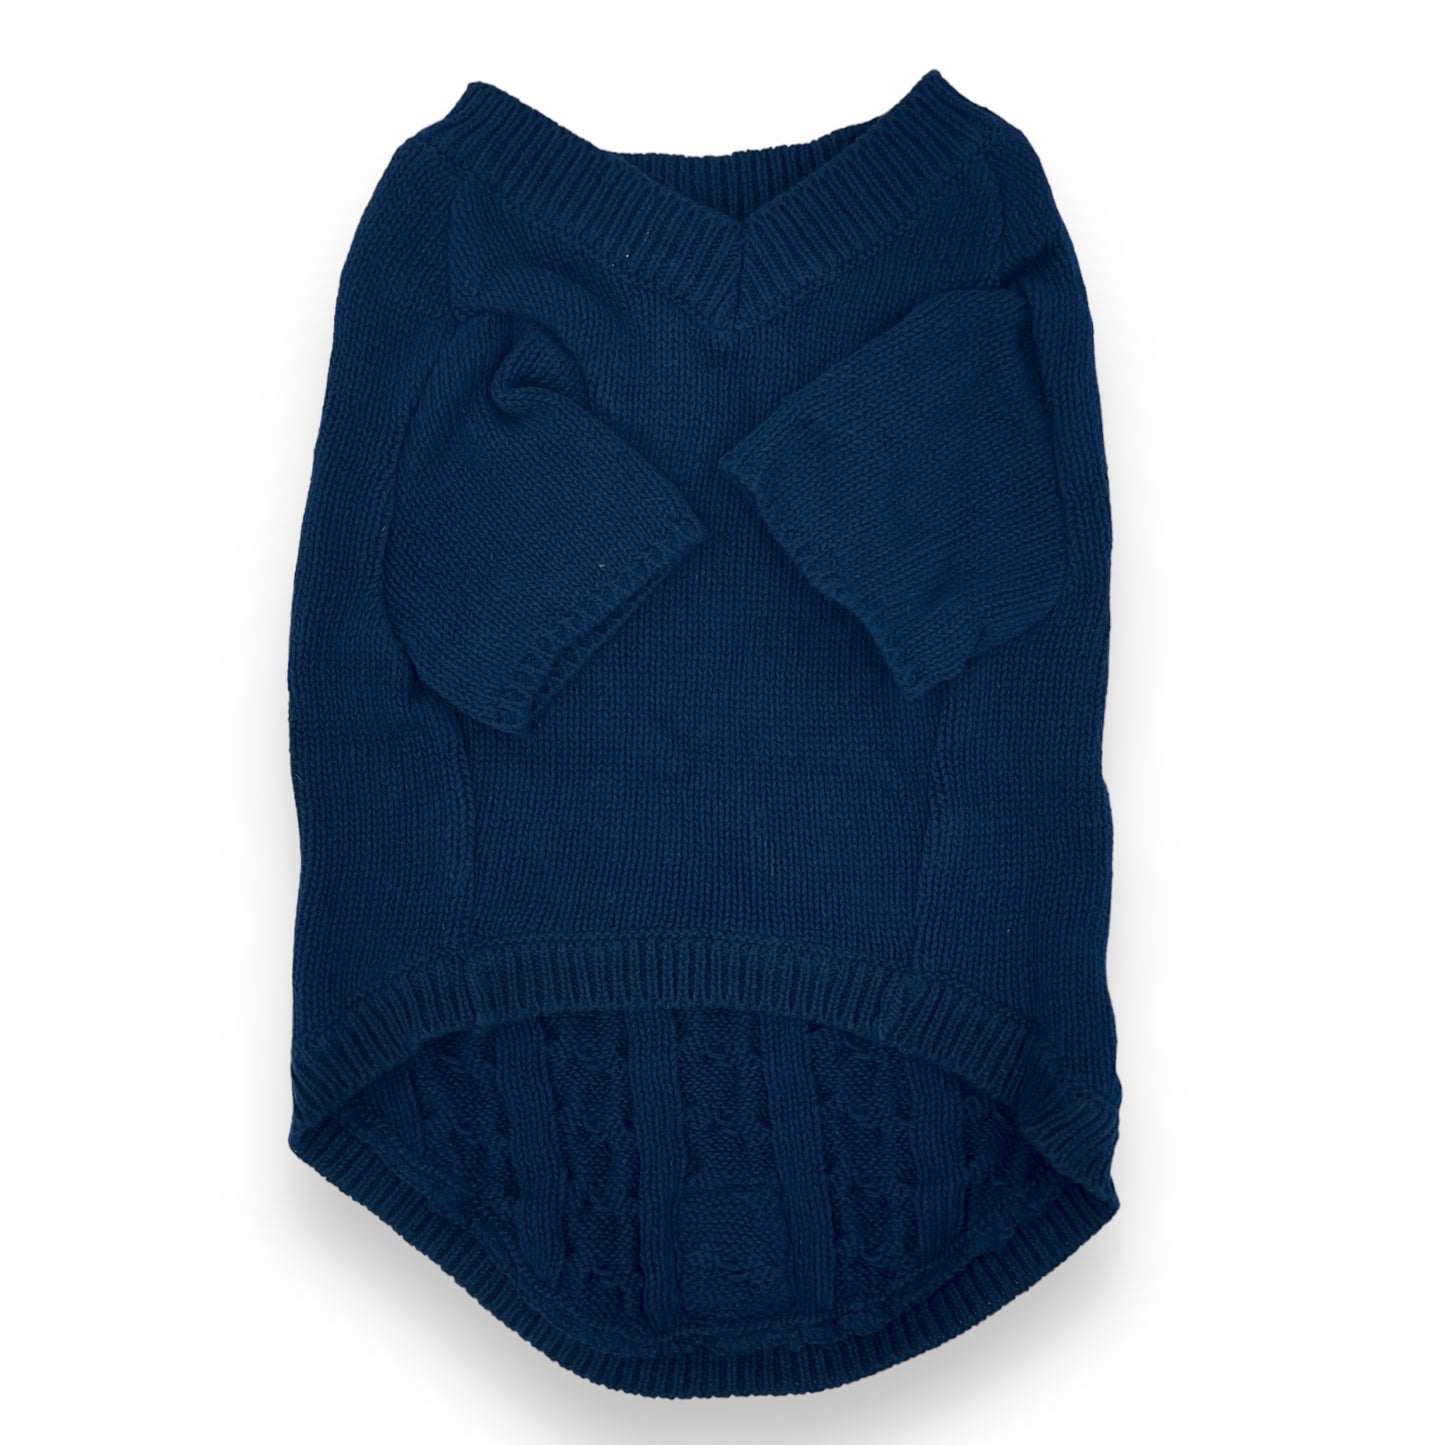 Doggy Jumper - Blue